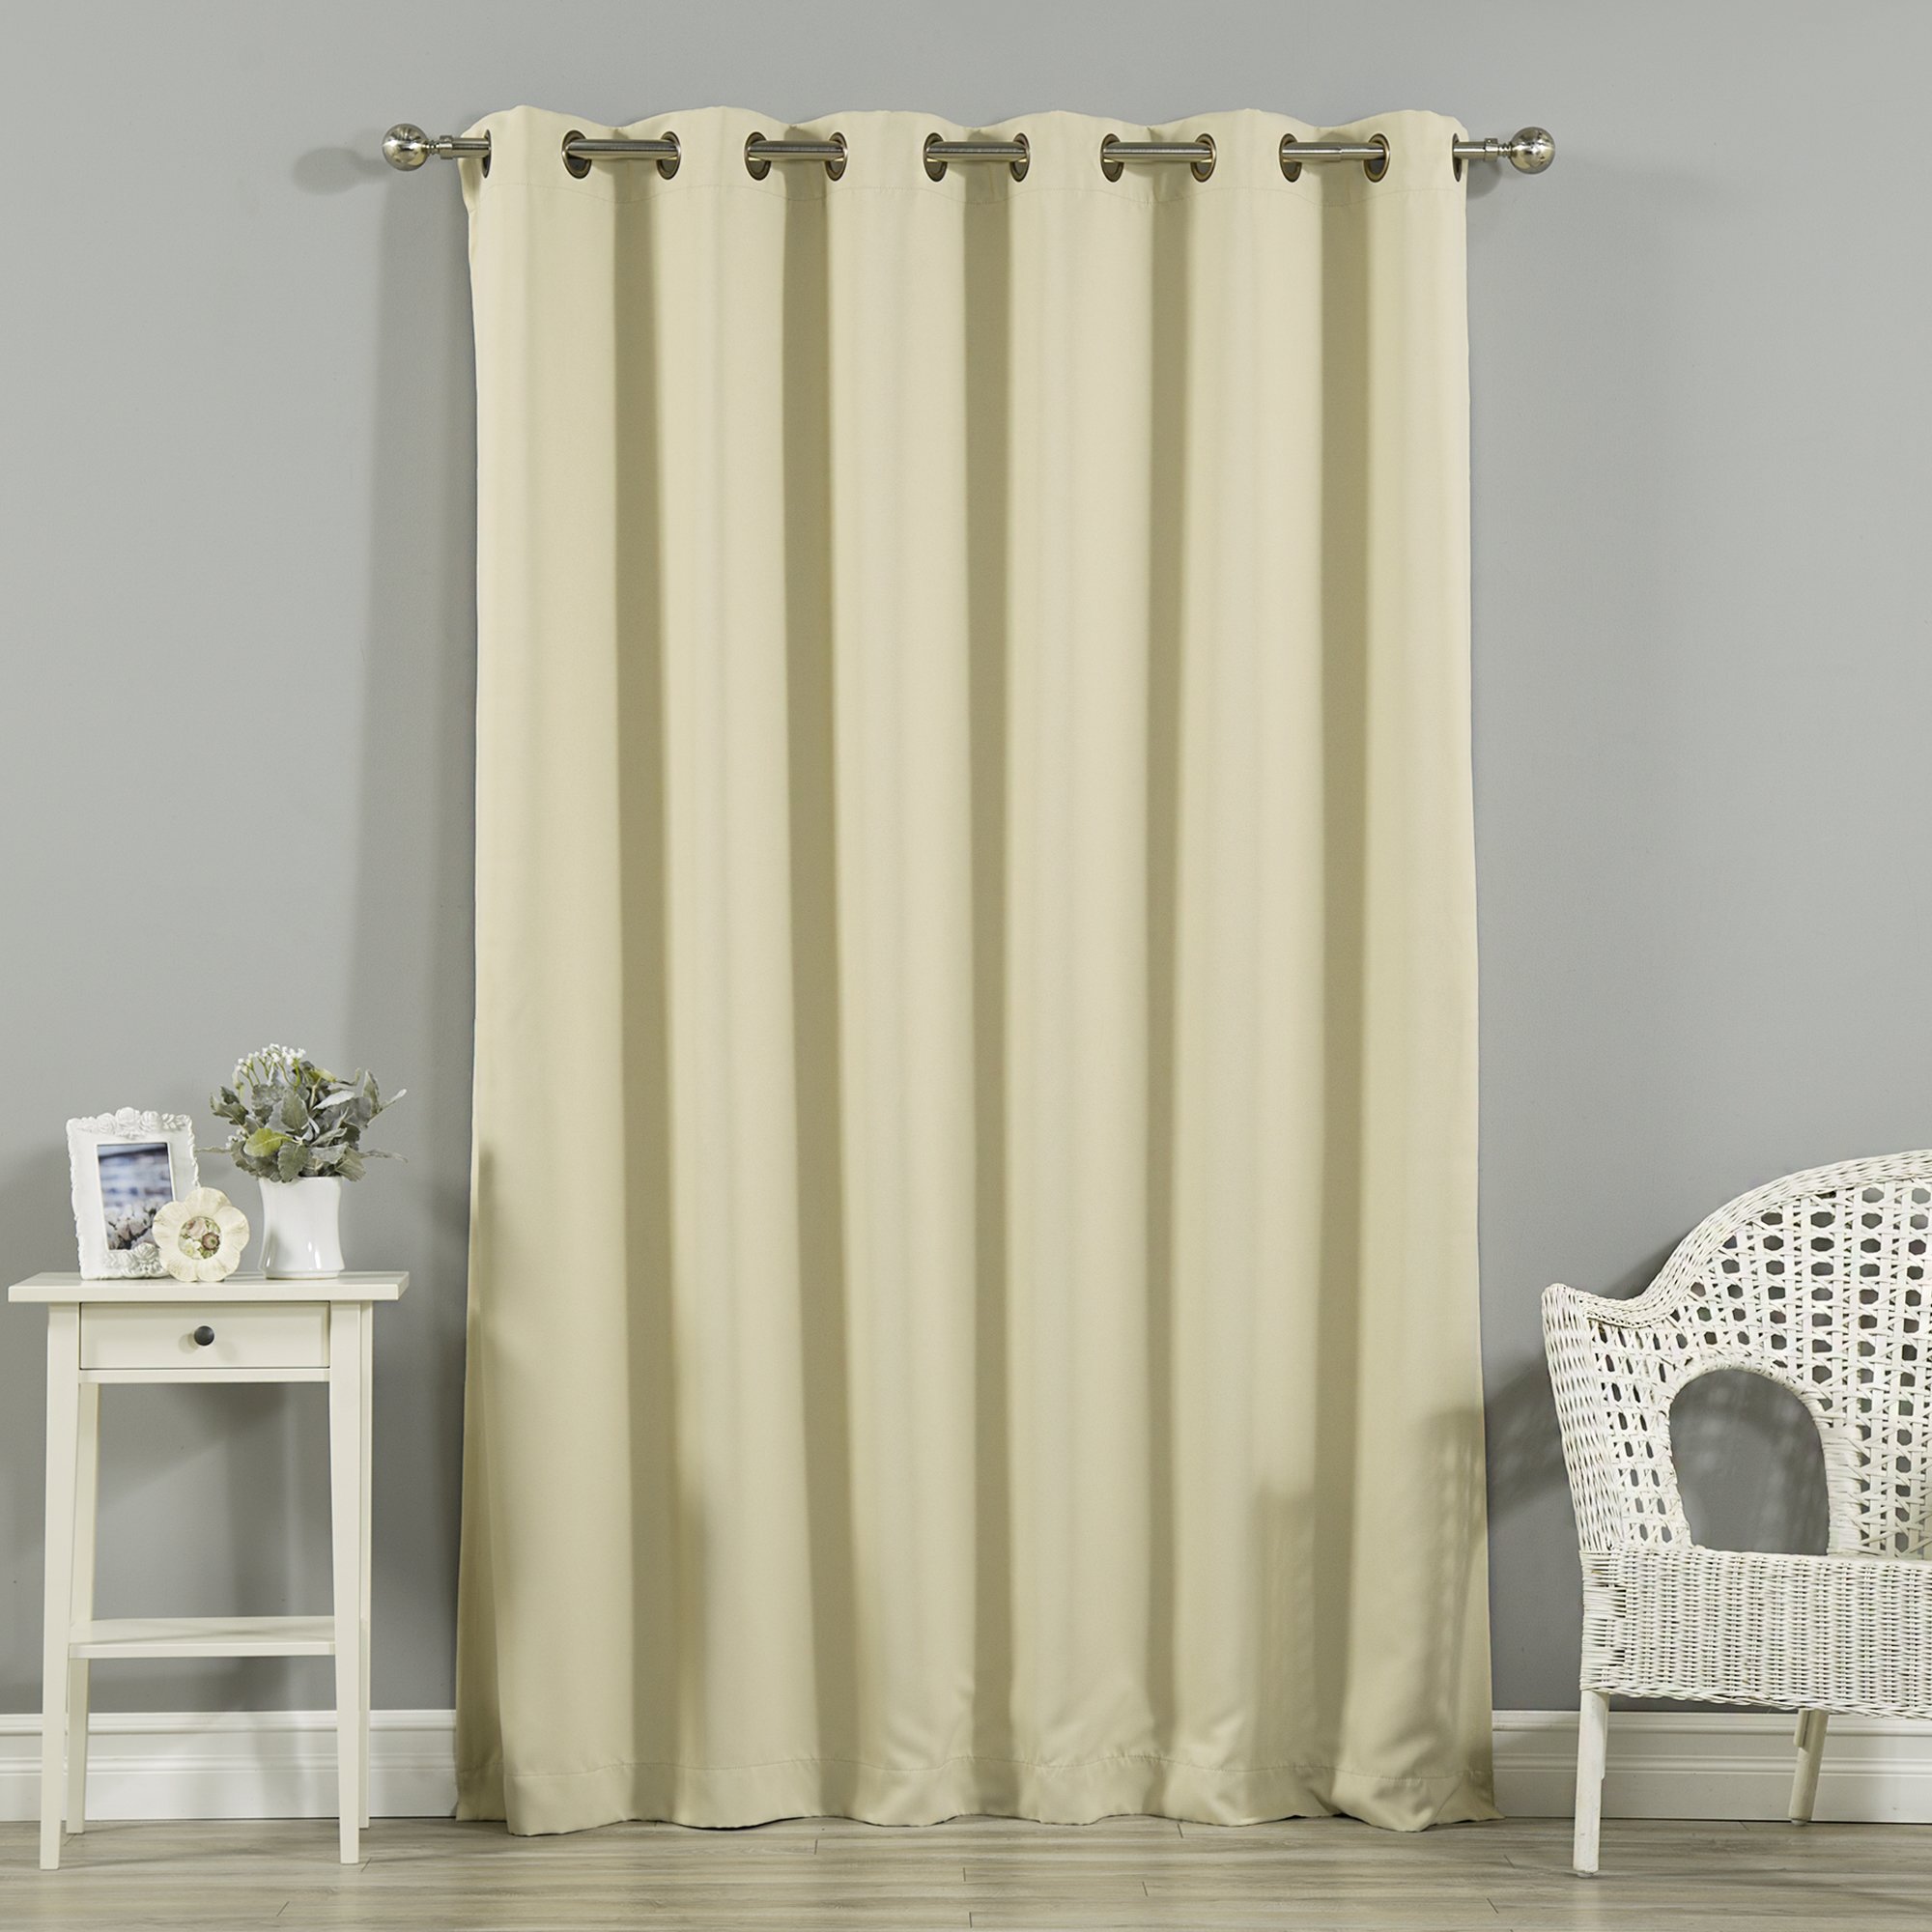 Get That Exotic Look For Your Living Room With Pinch Pleat Drapes